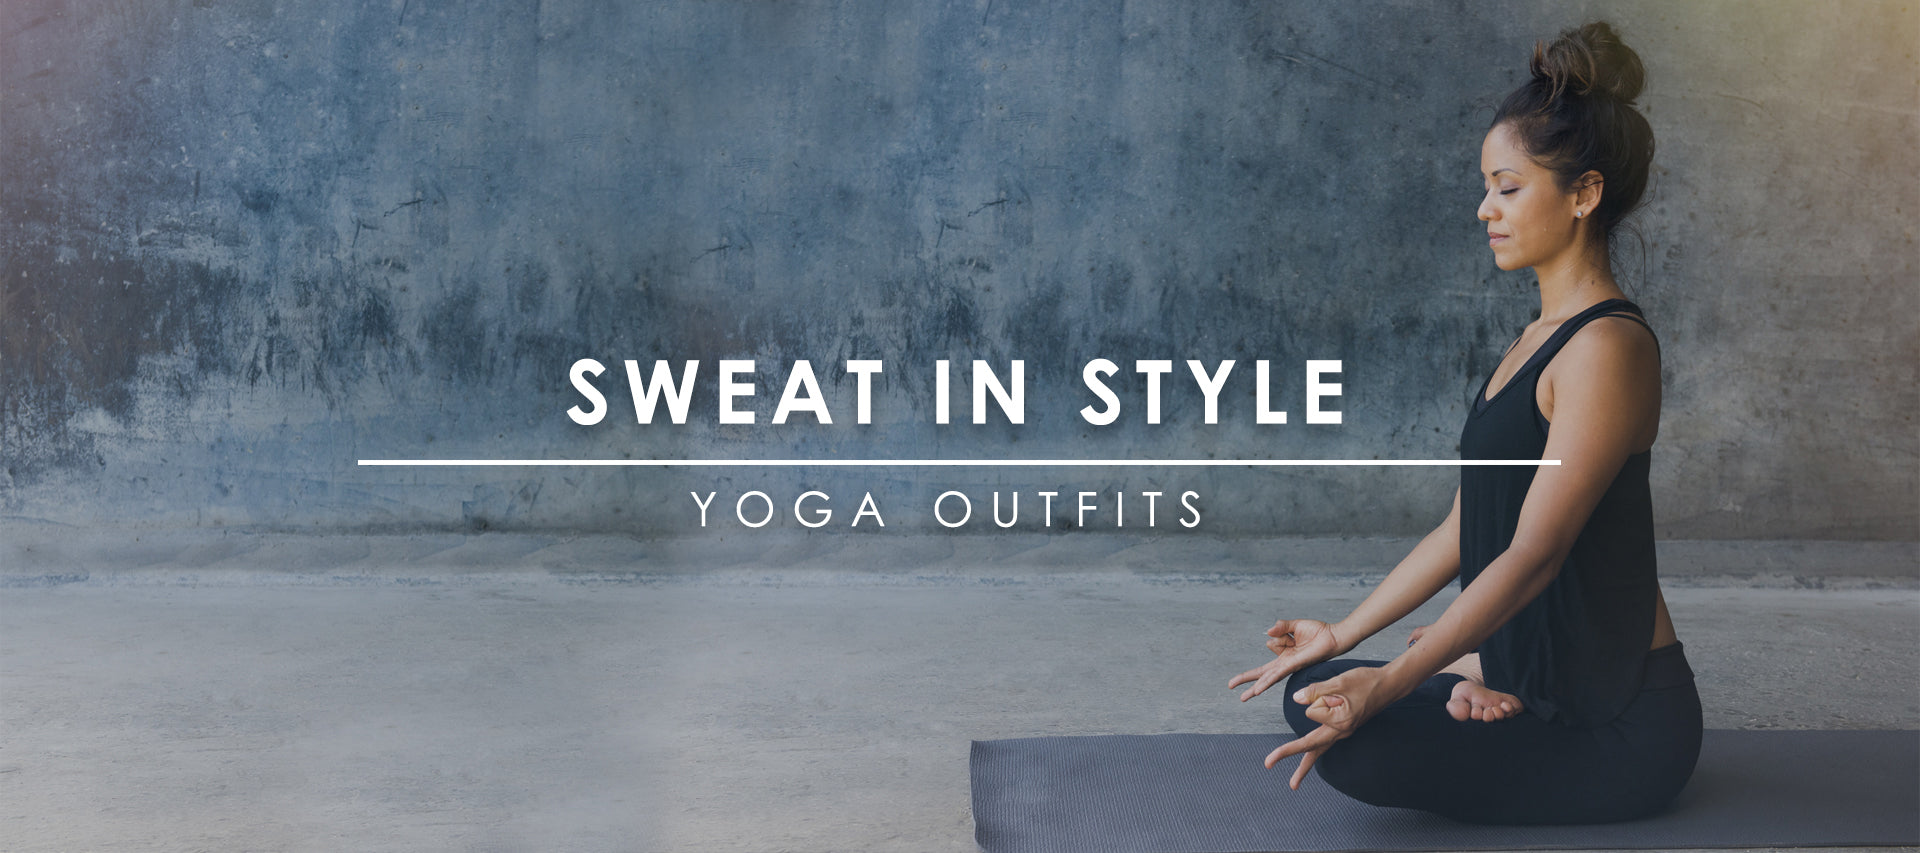 What to Wear to Yoga or While Doing Yoga